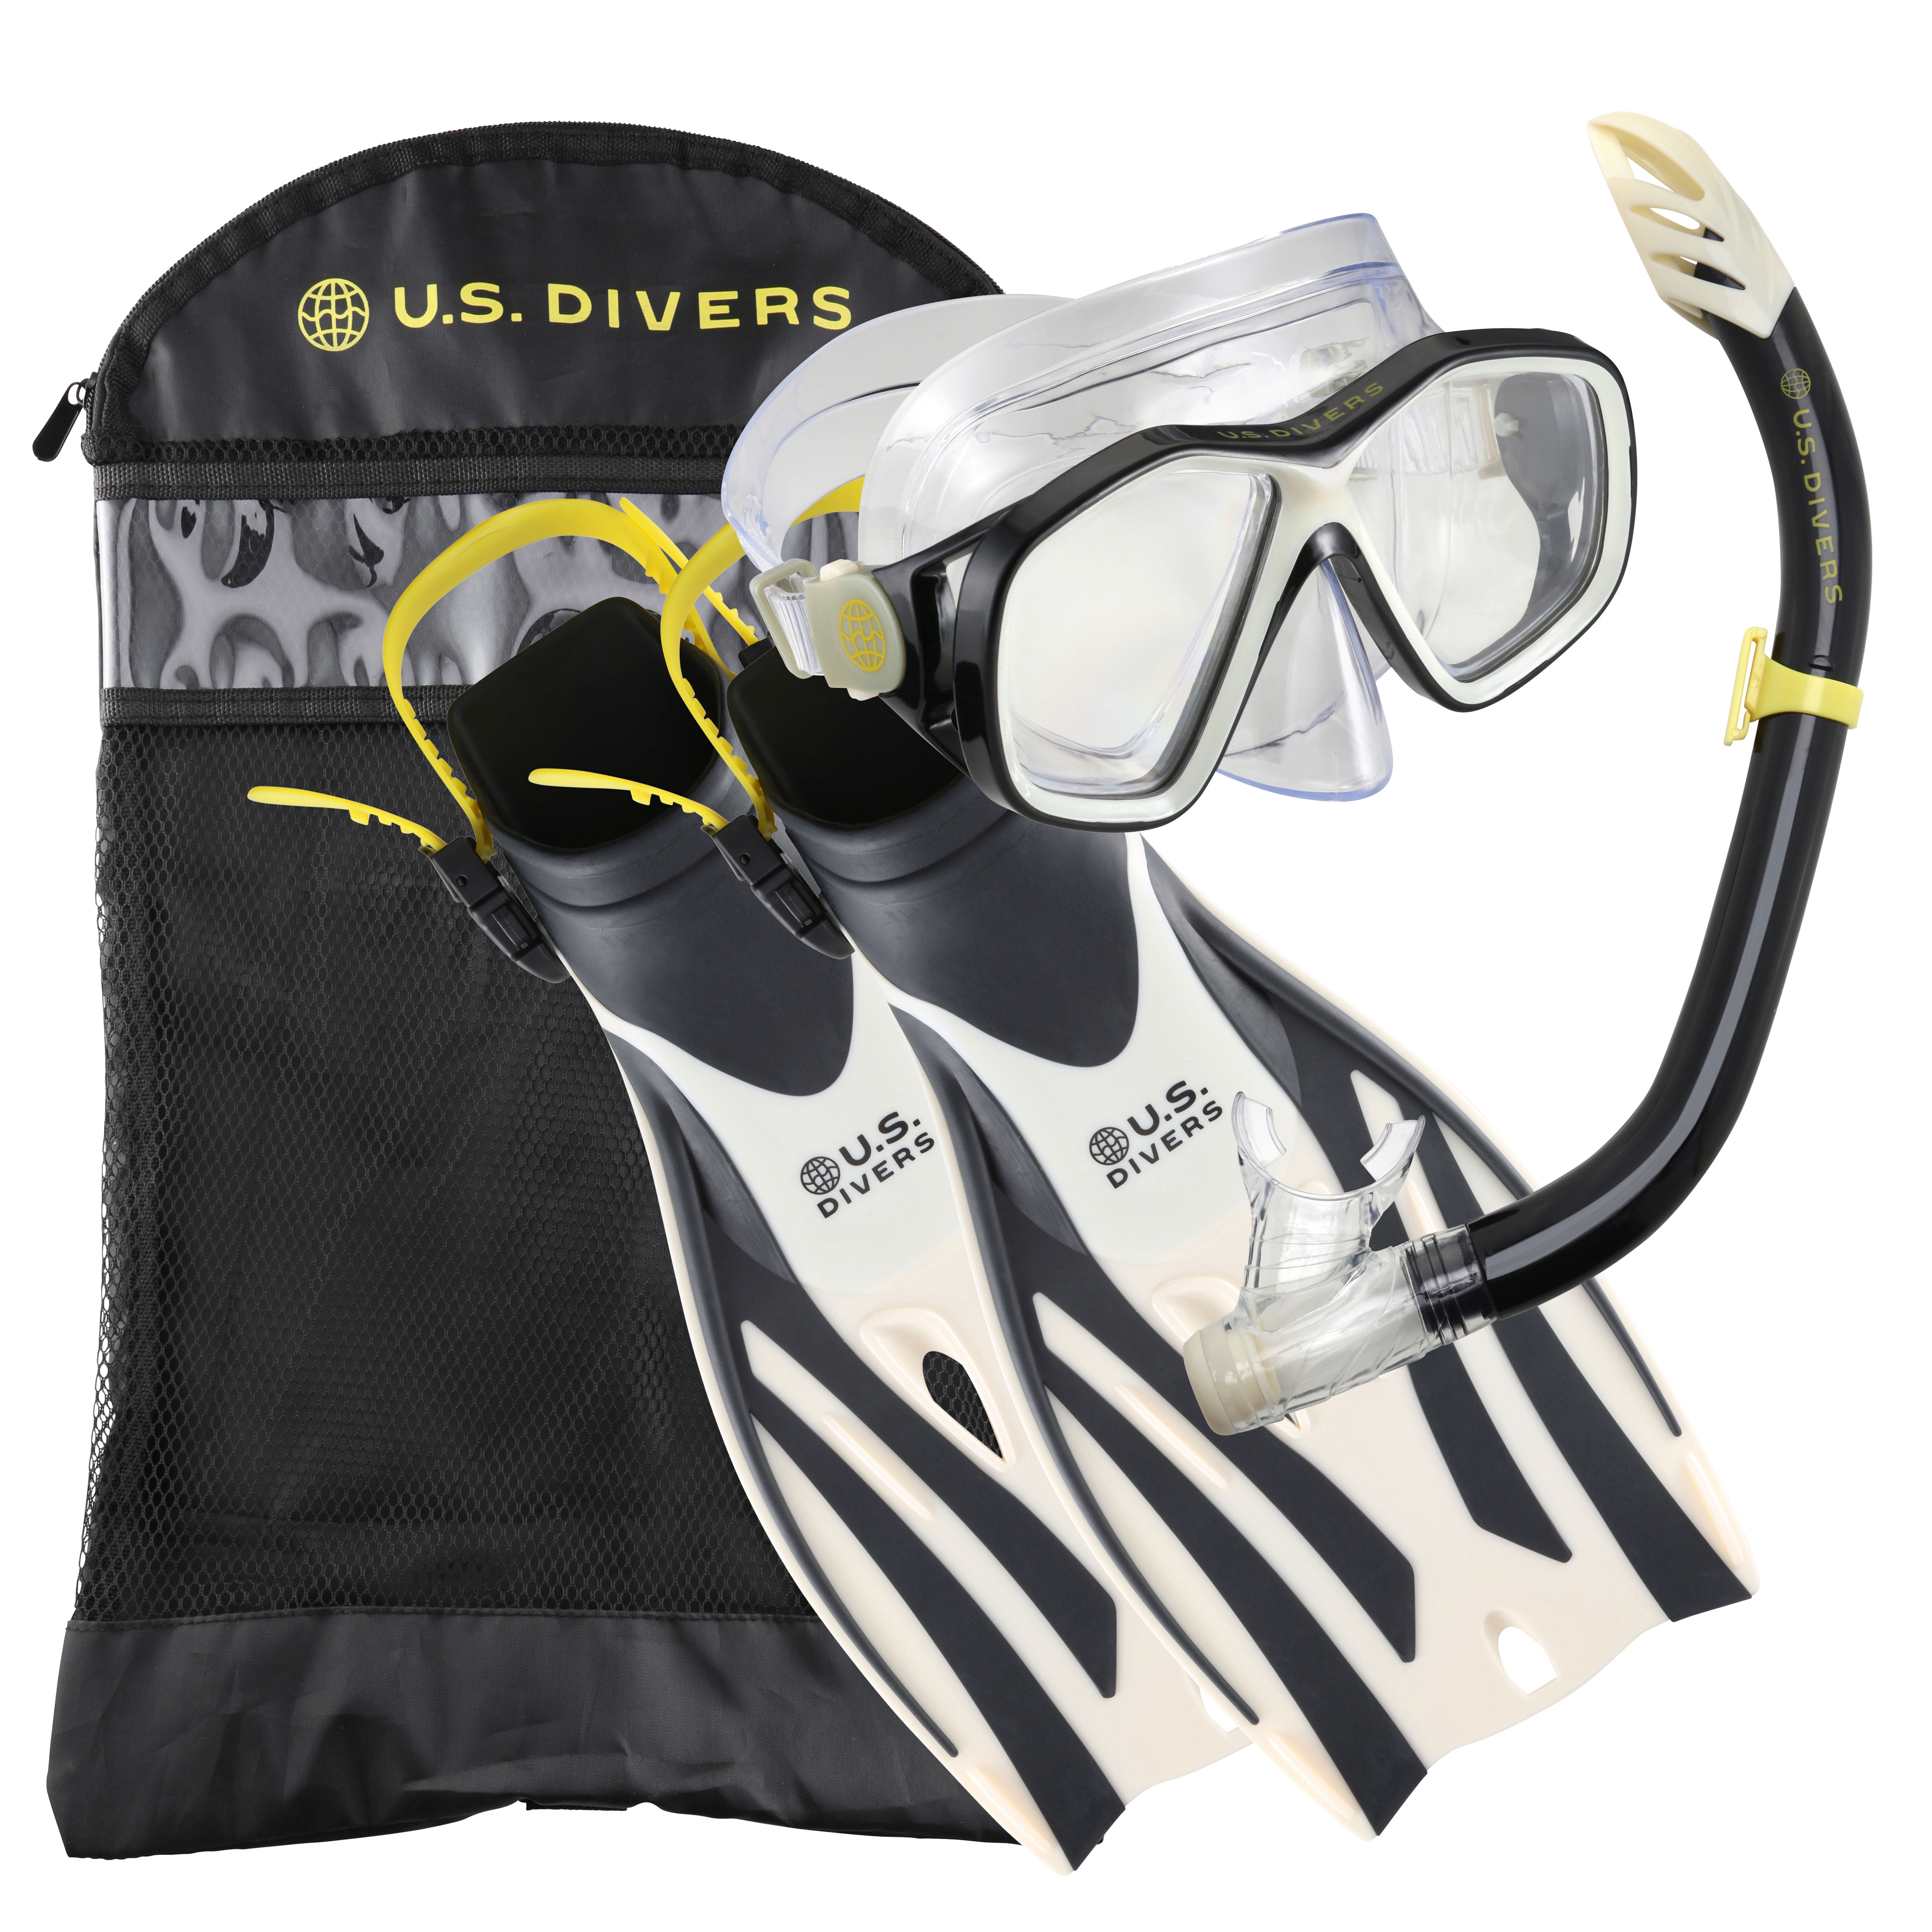 Preowned Scuba Diving Goggles 2 pack Black/Yellow 